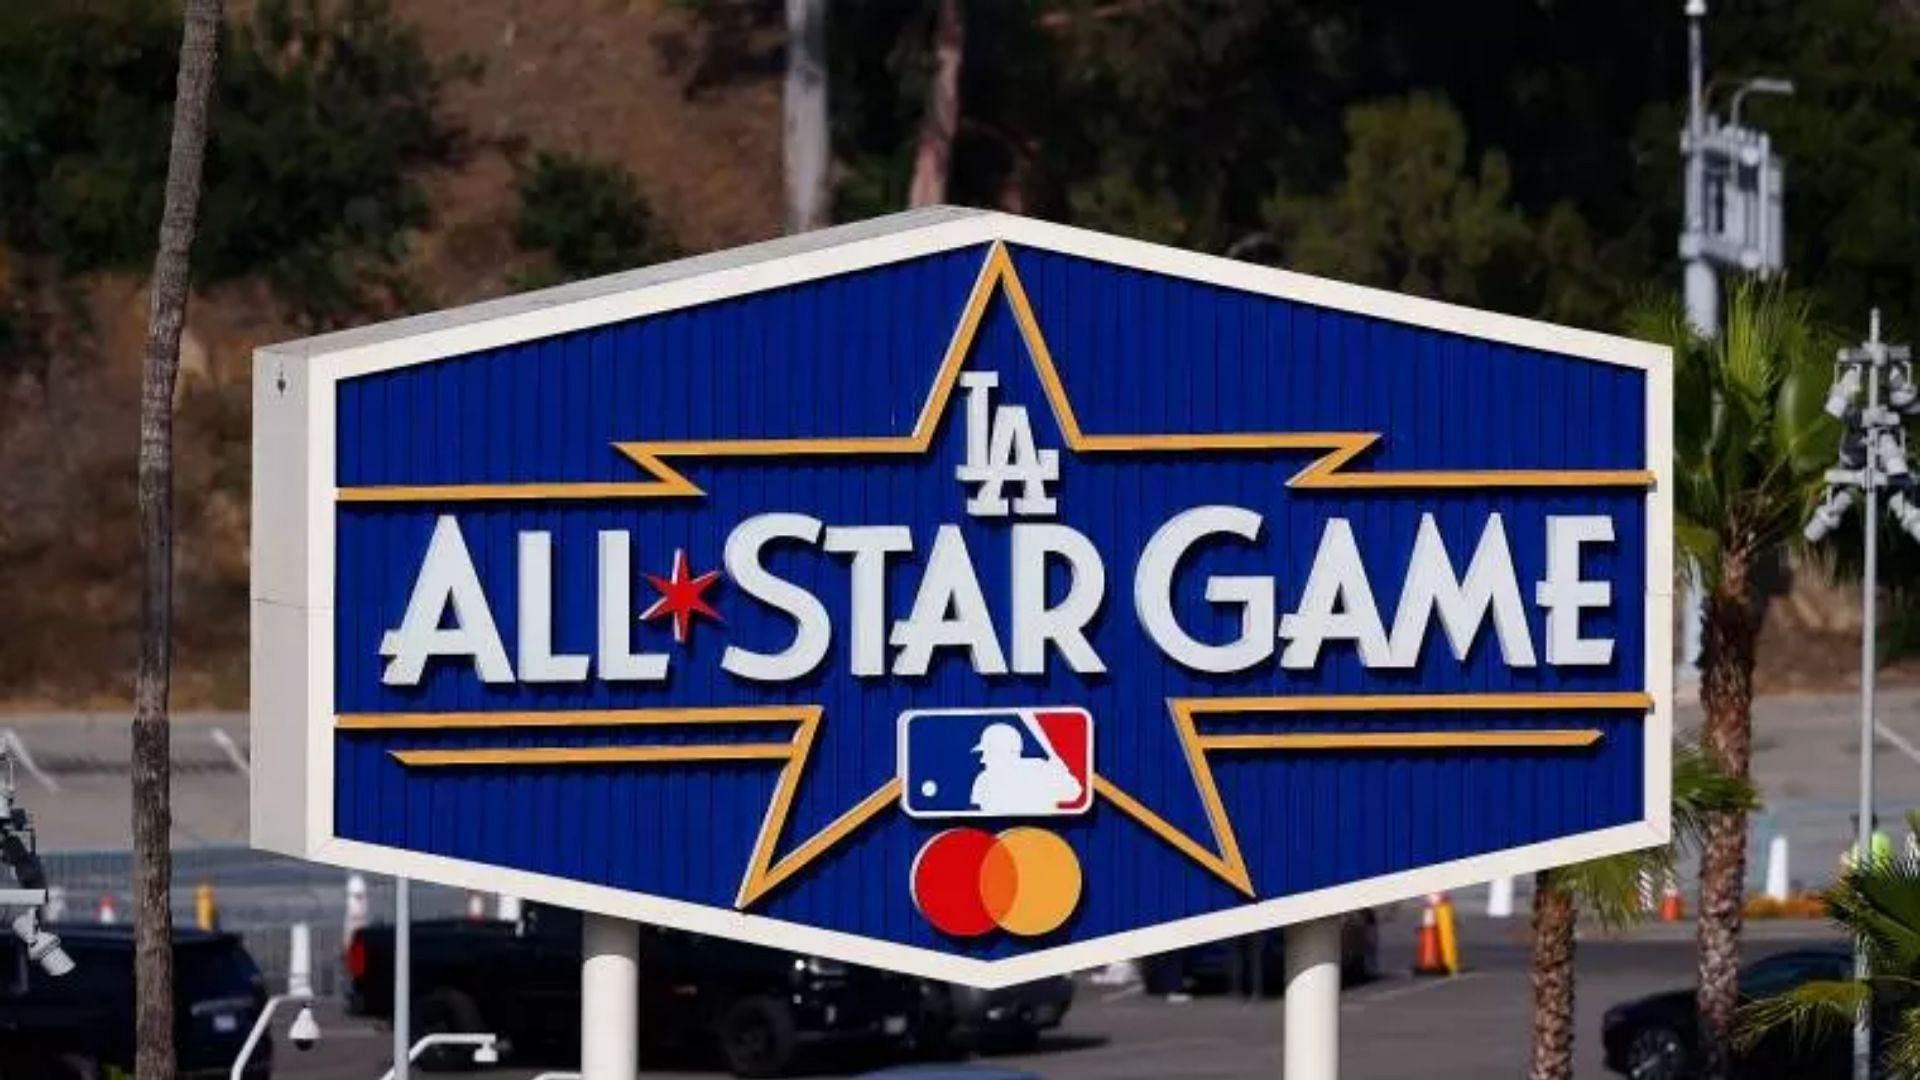 Major League Baseall All-Star Game 2022 voting has opened.